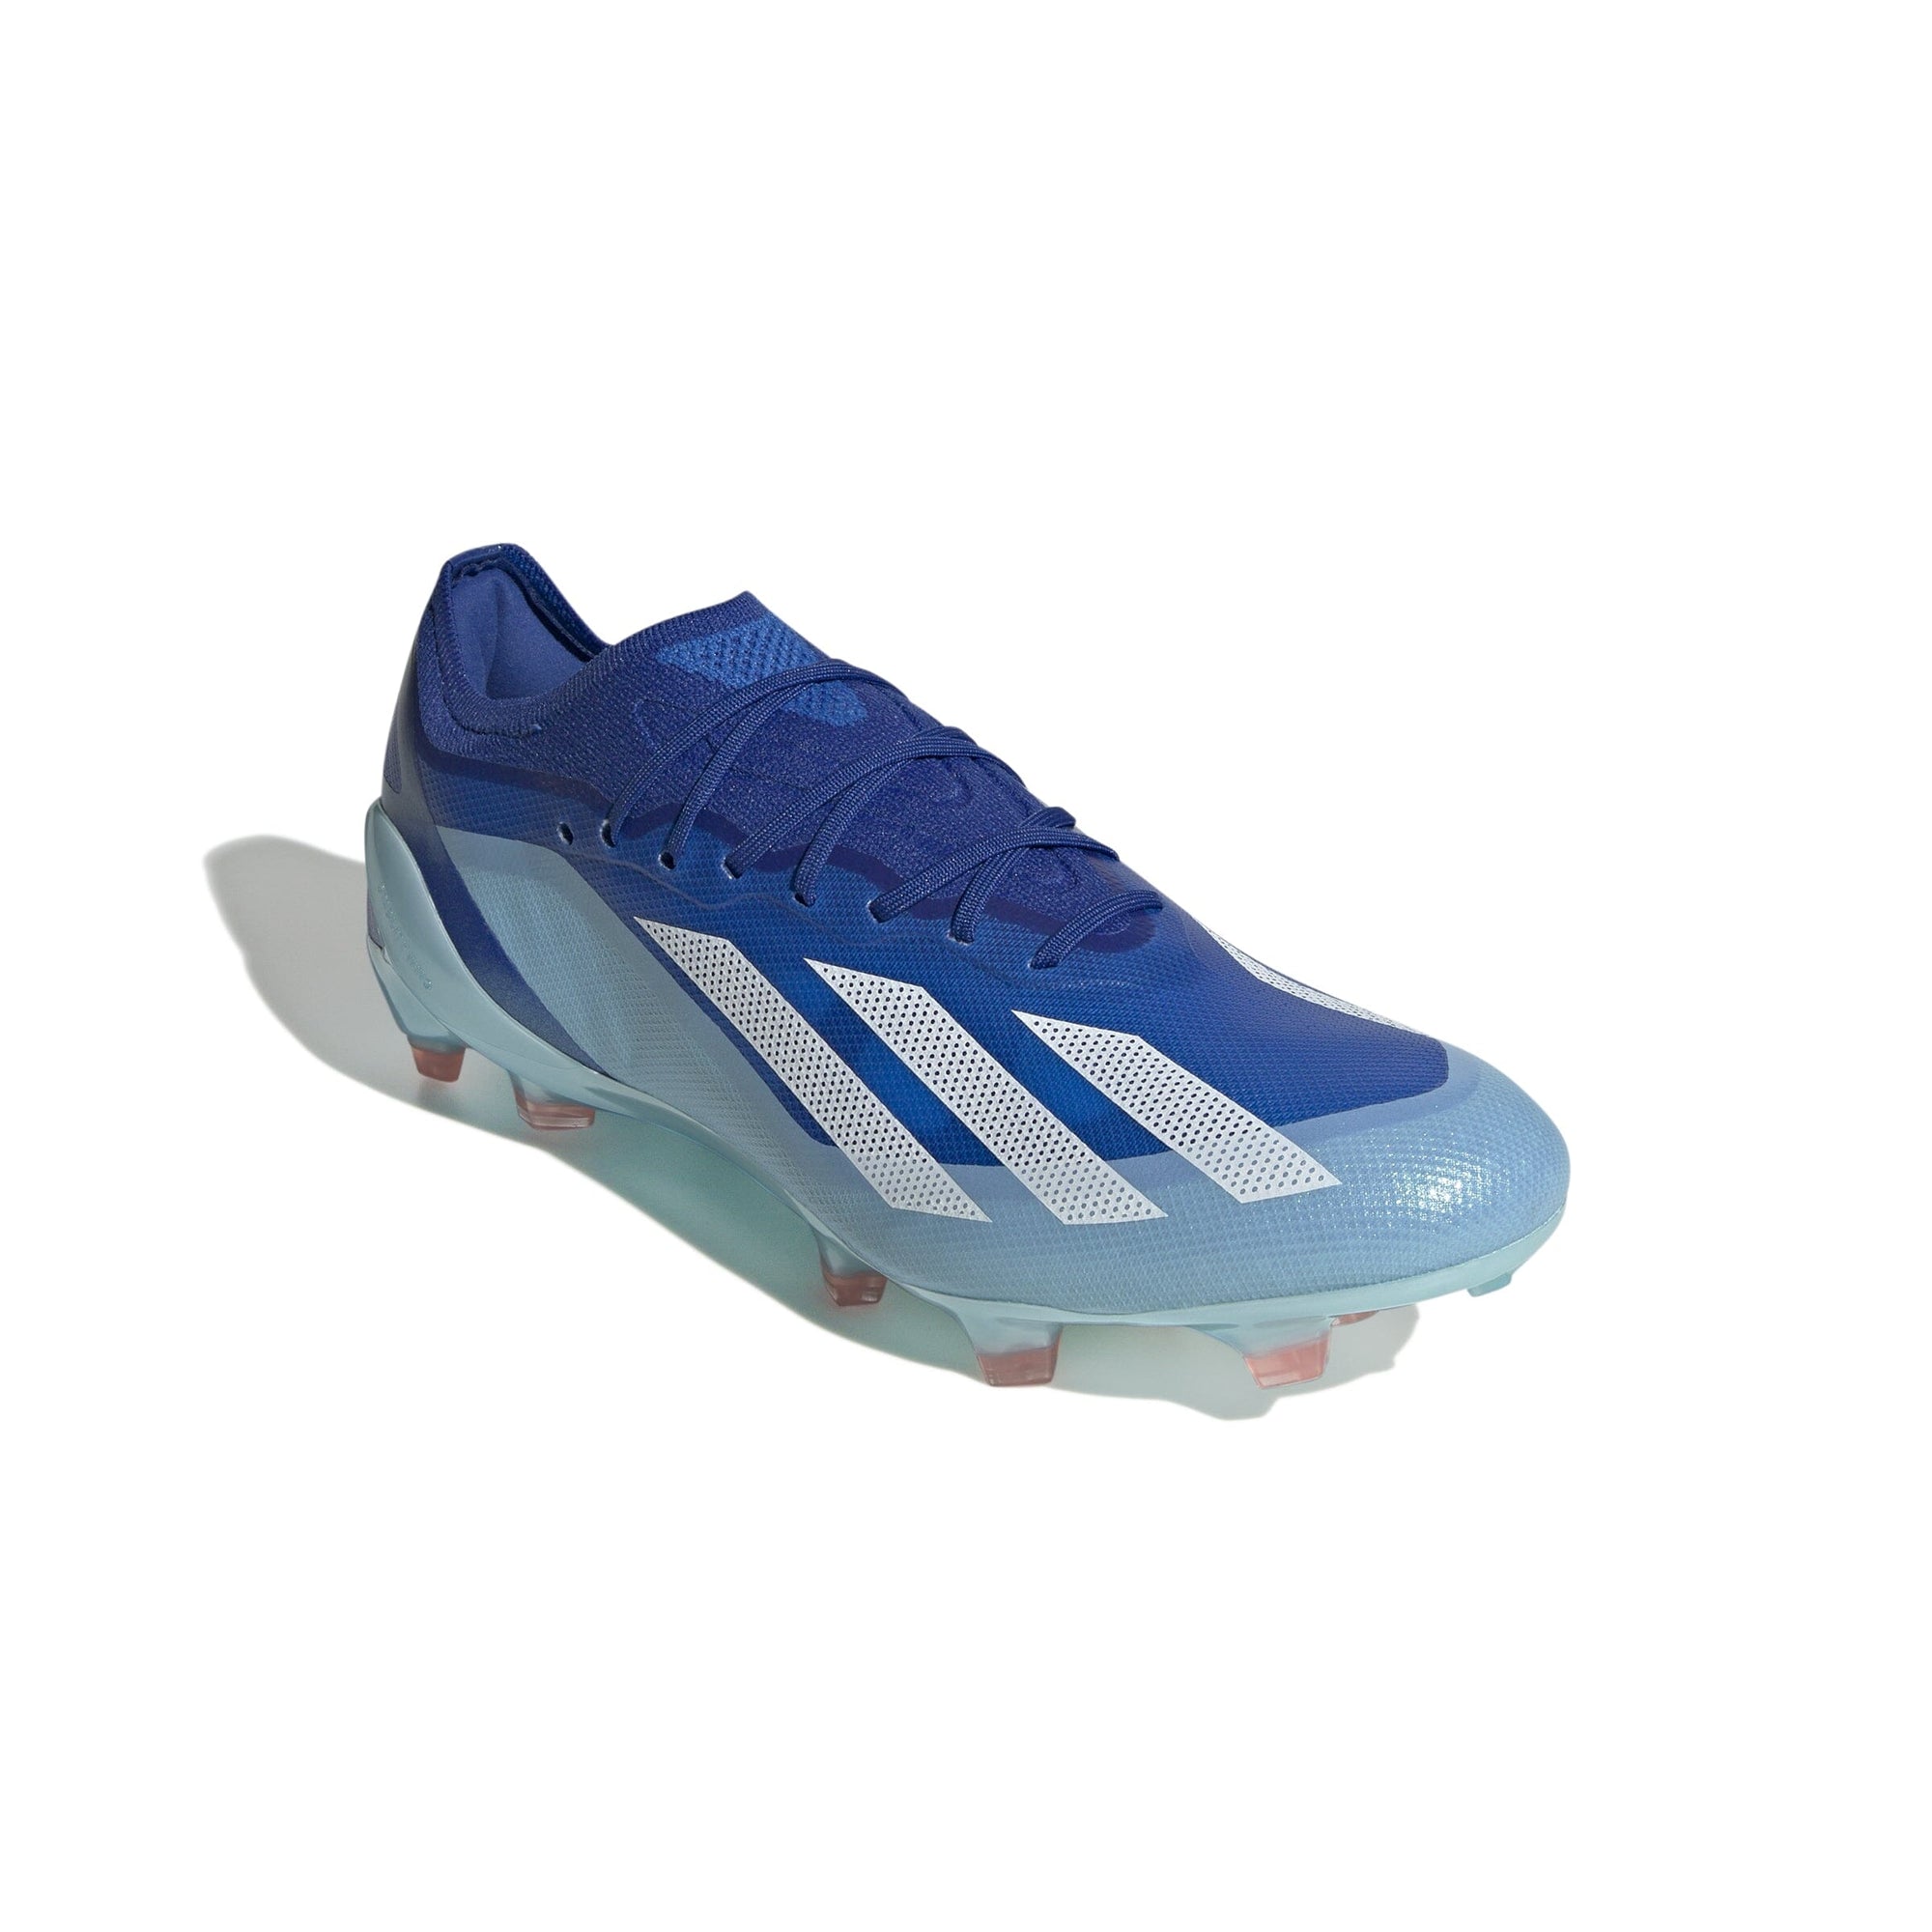 adidas Unisex X Crazyfast.1 Firm Ground Cleats | GY7416 Soccer Cleats Adidas 